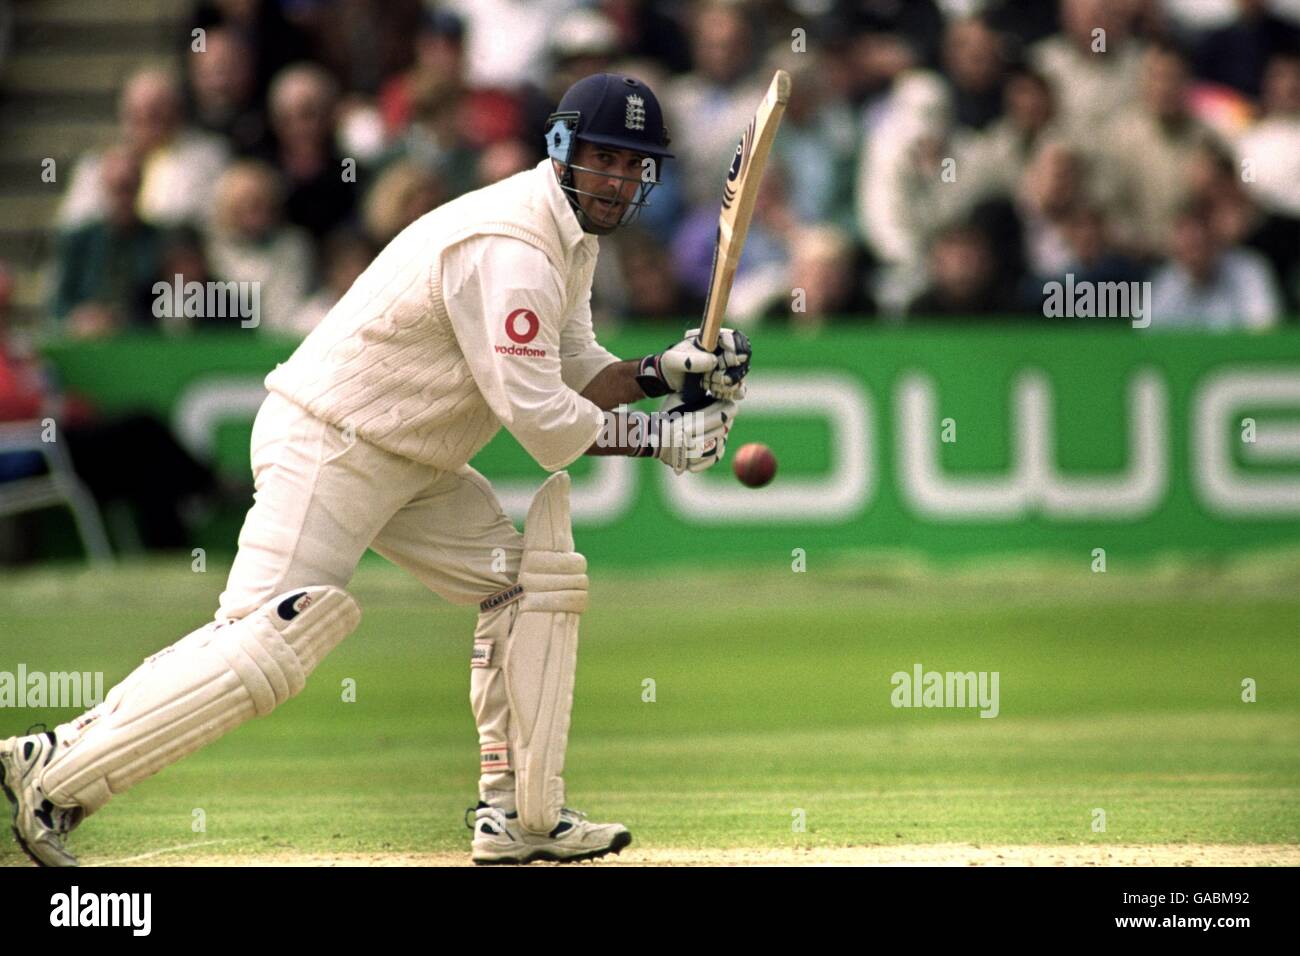 Cricket - England v Sri Lanka - First npower Test - Third Day. Graham Thorpe in action for England Stock Photo